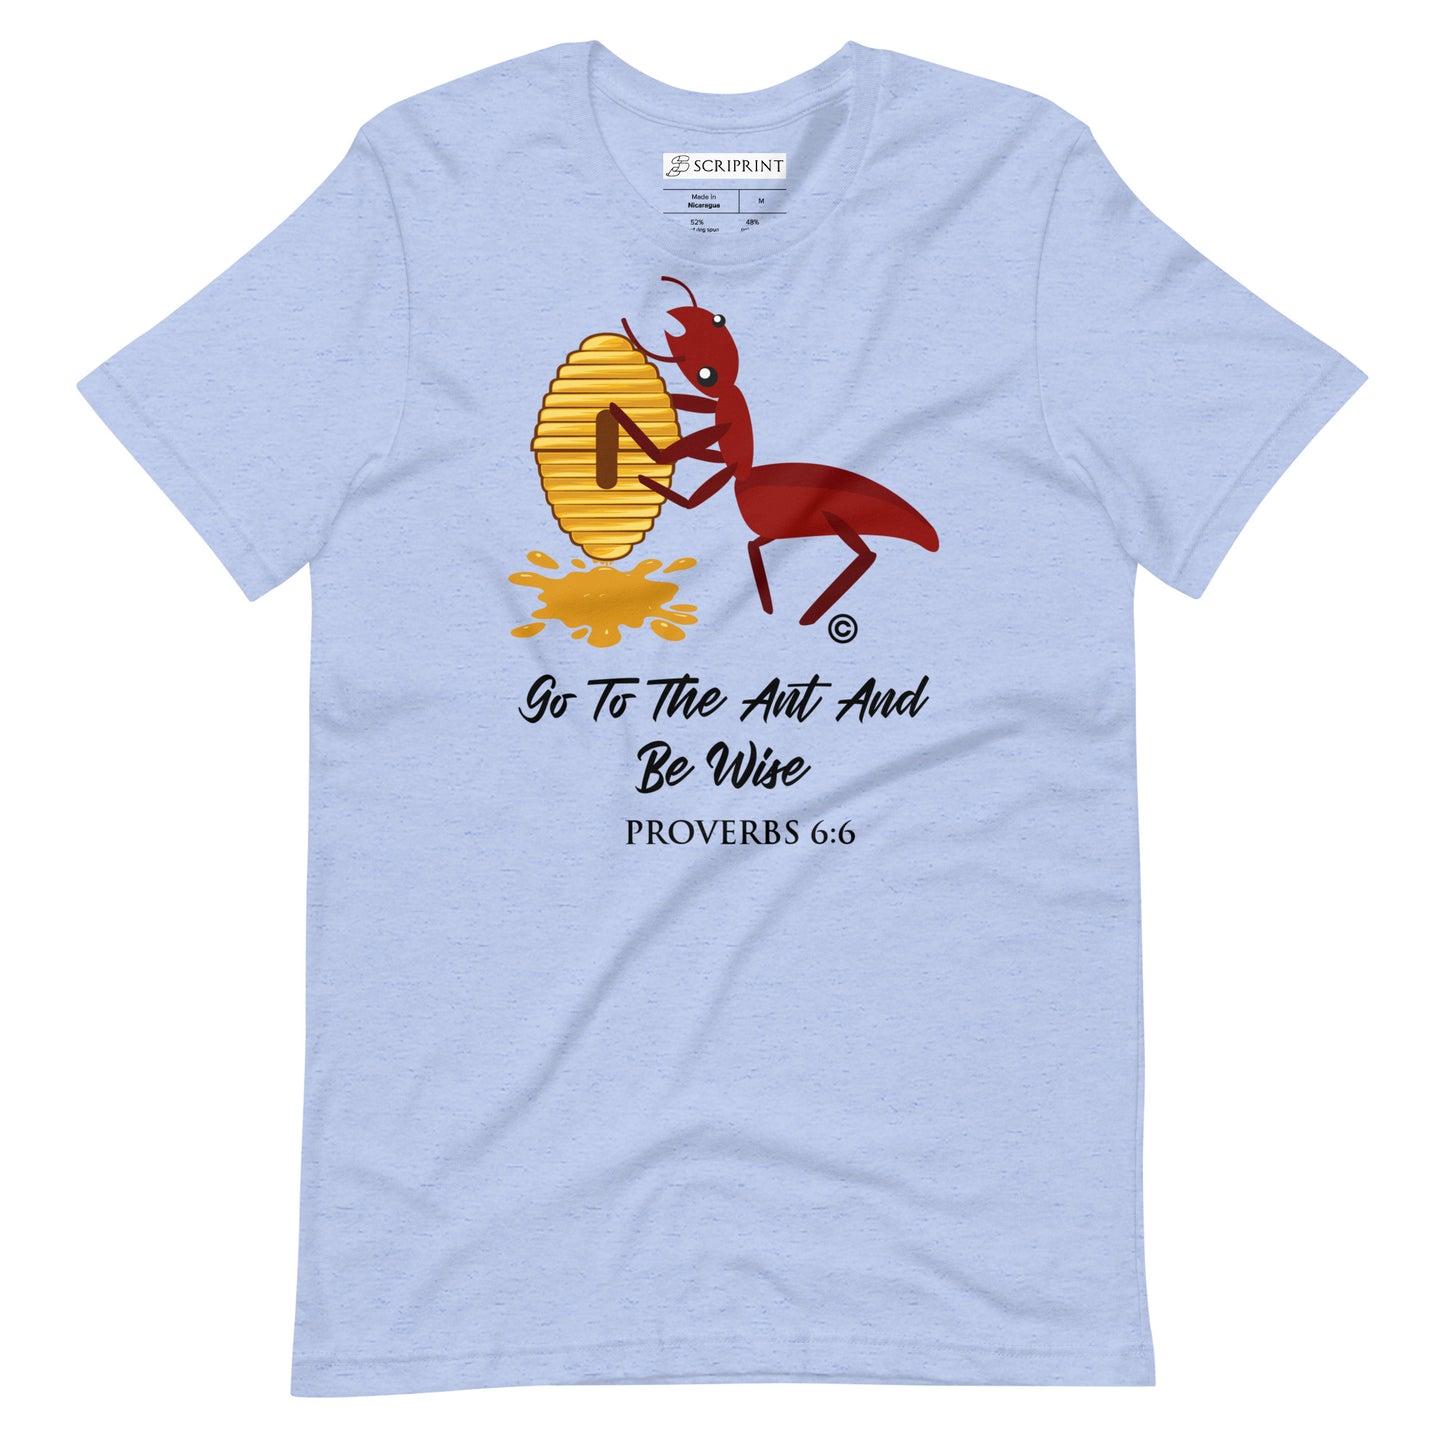 Be Wise Men's T-Shirt